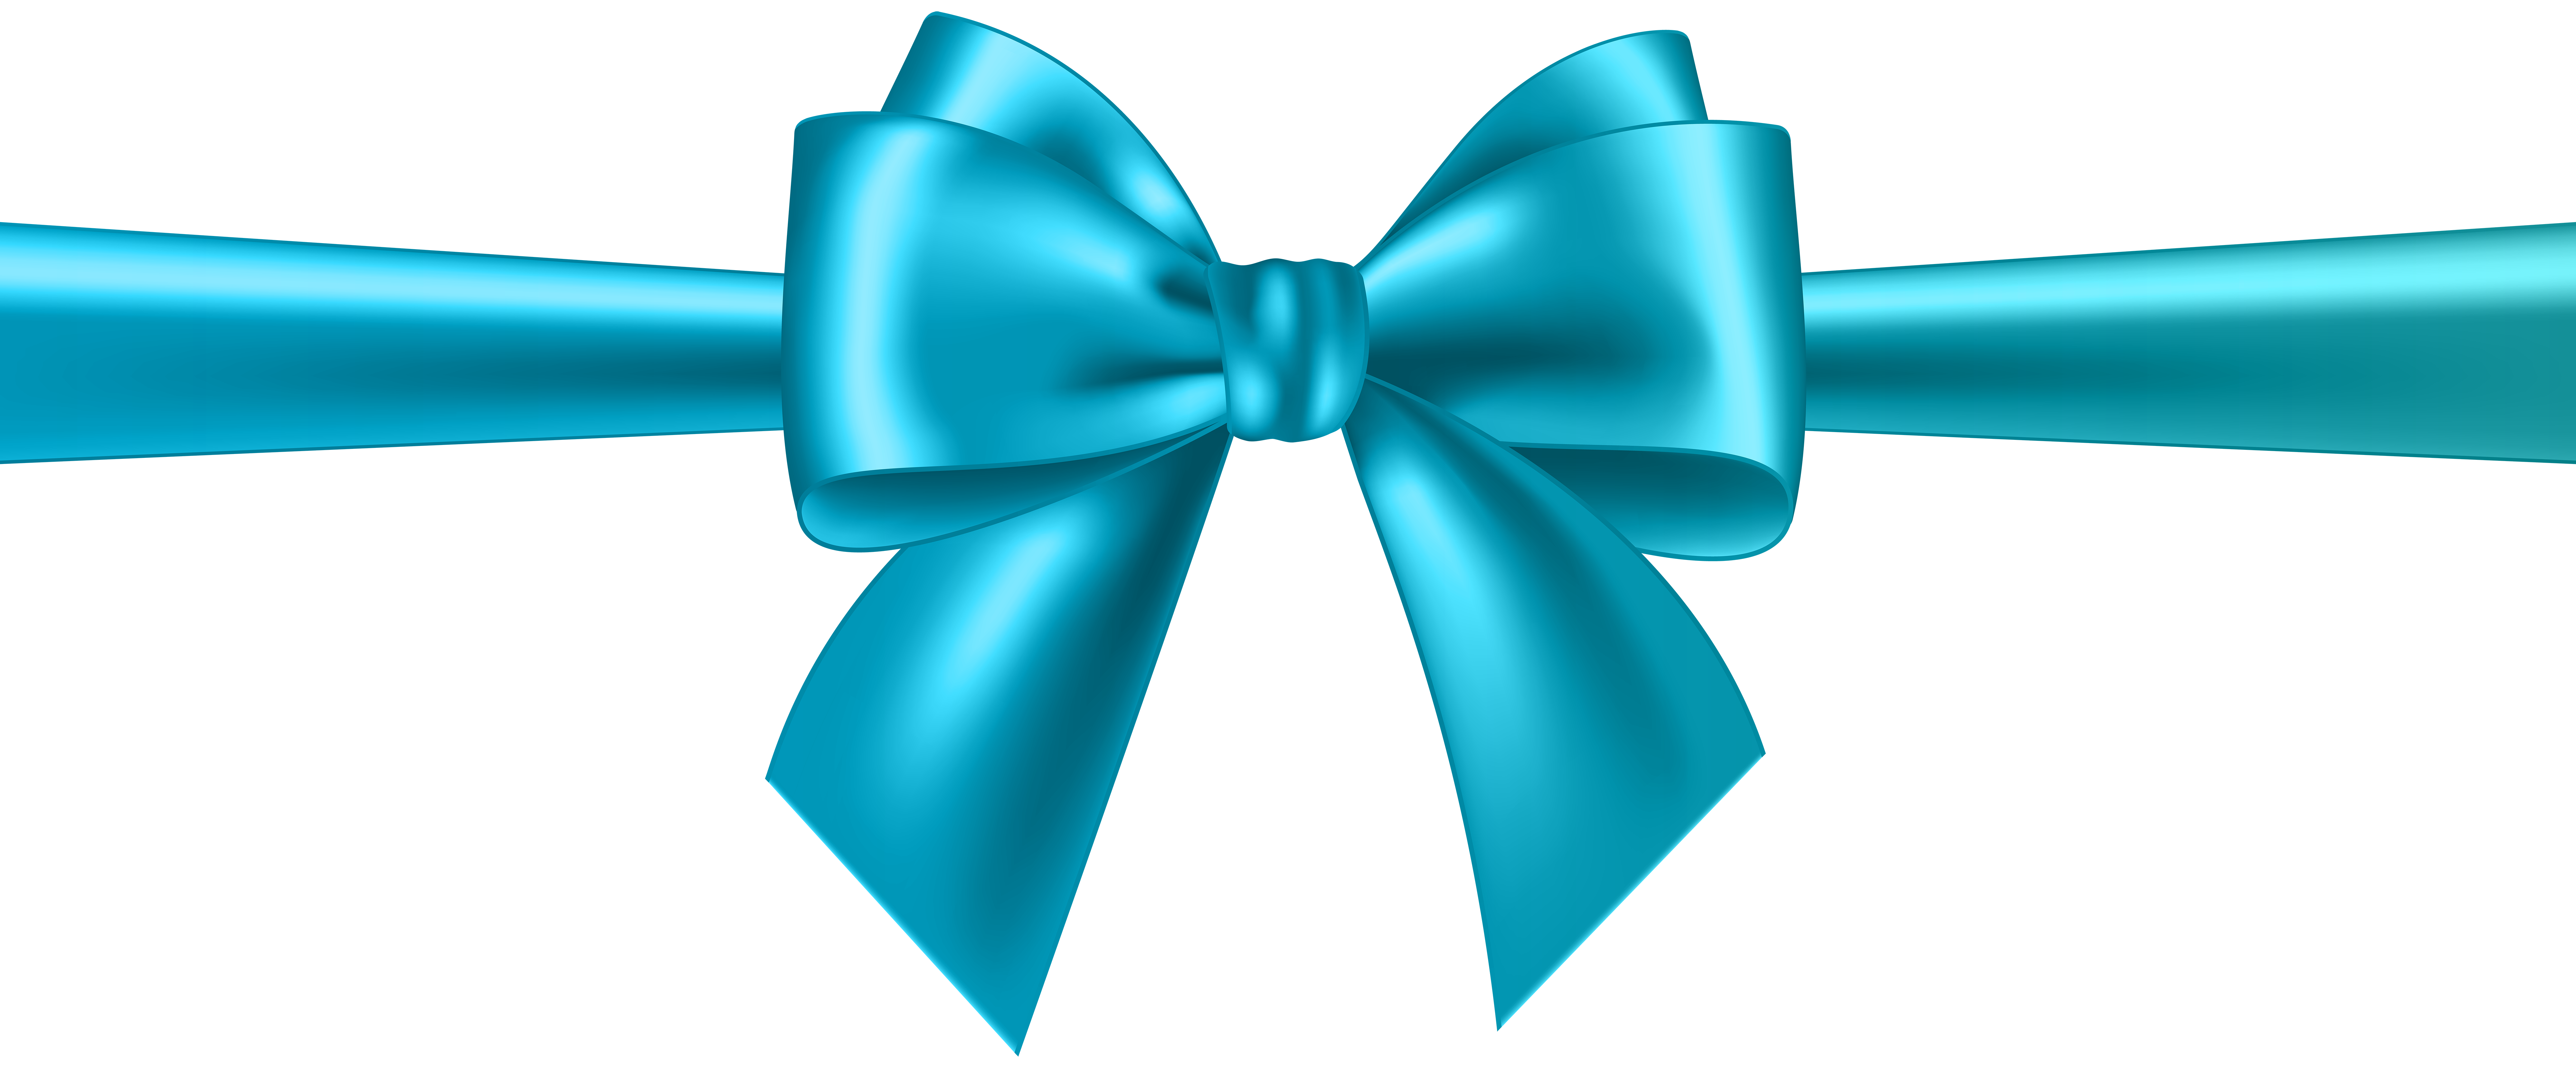 Download Blue Bow Transparent Clip Art | Gallery Yopriceville ...